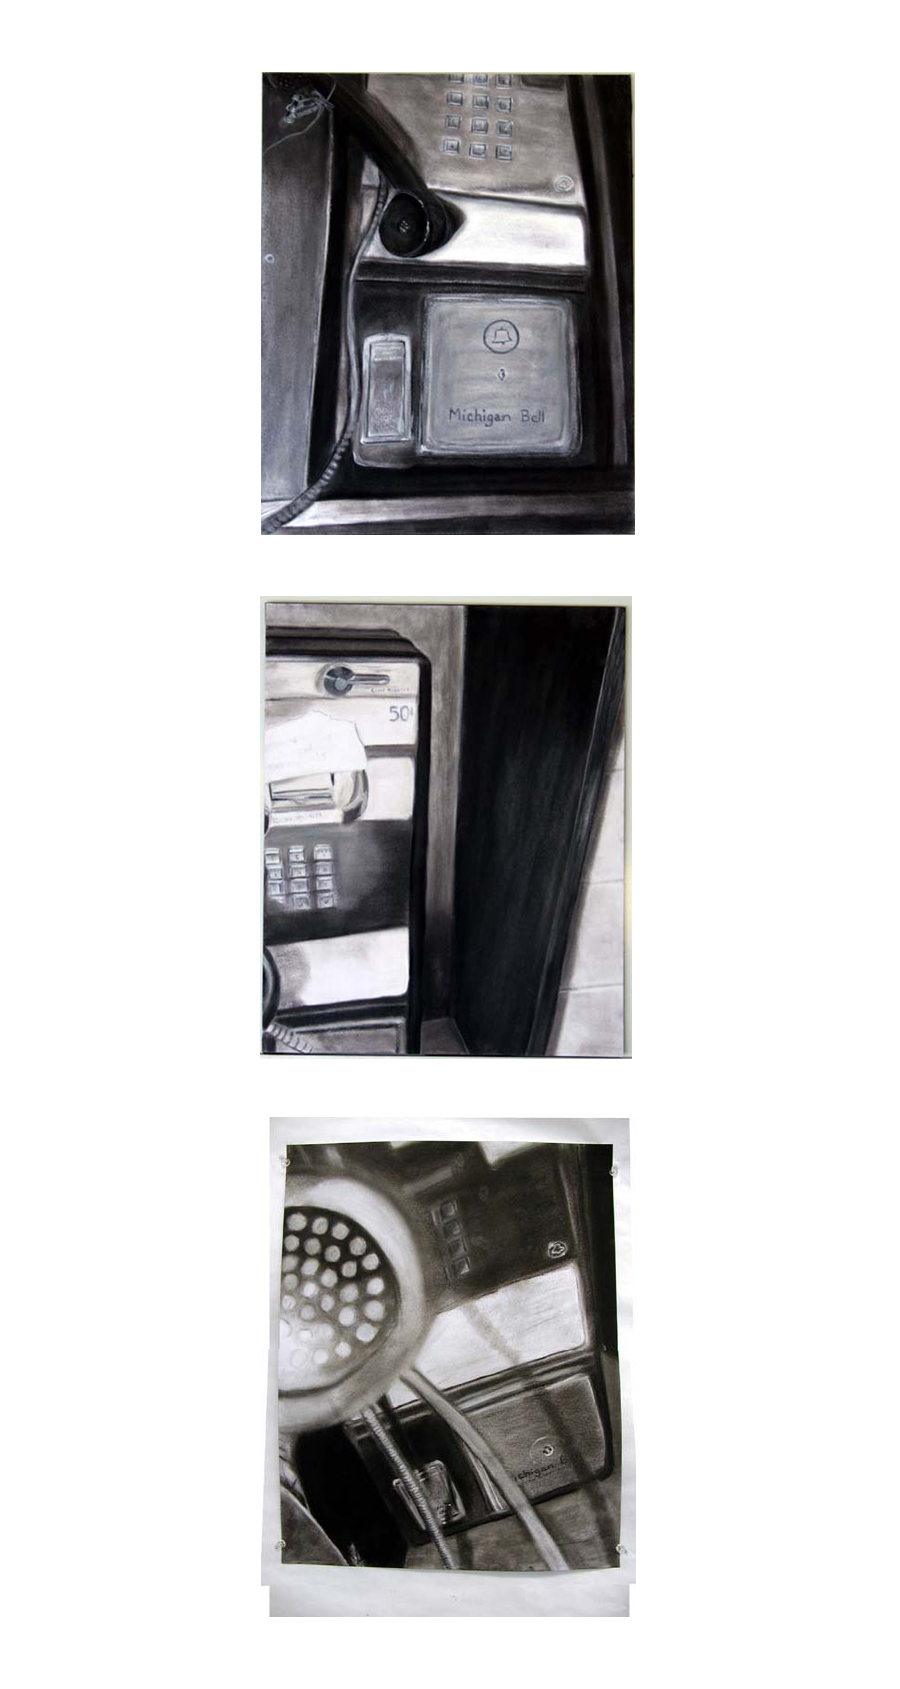 Series of graphite drawings depicting parts of a pay phone.